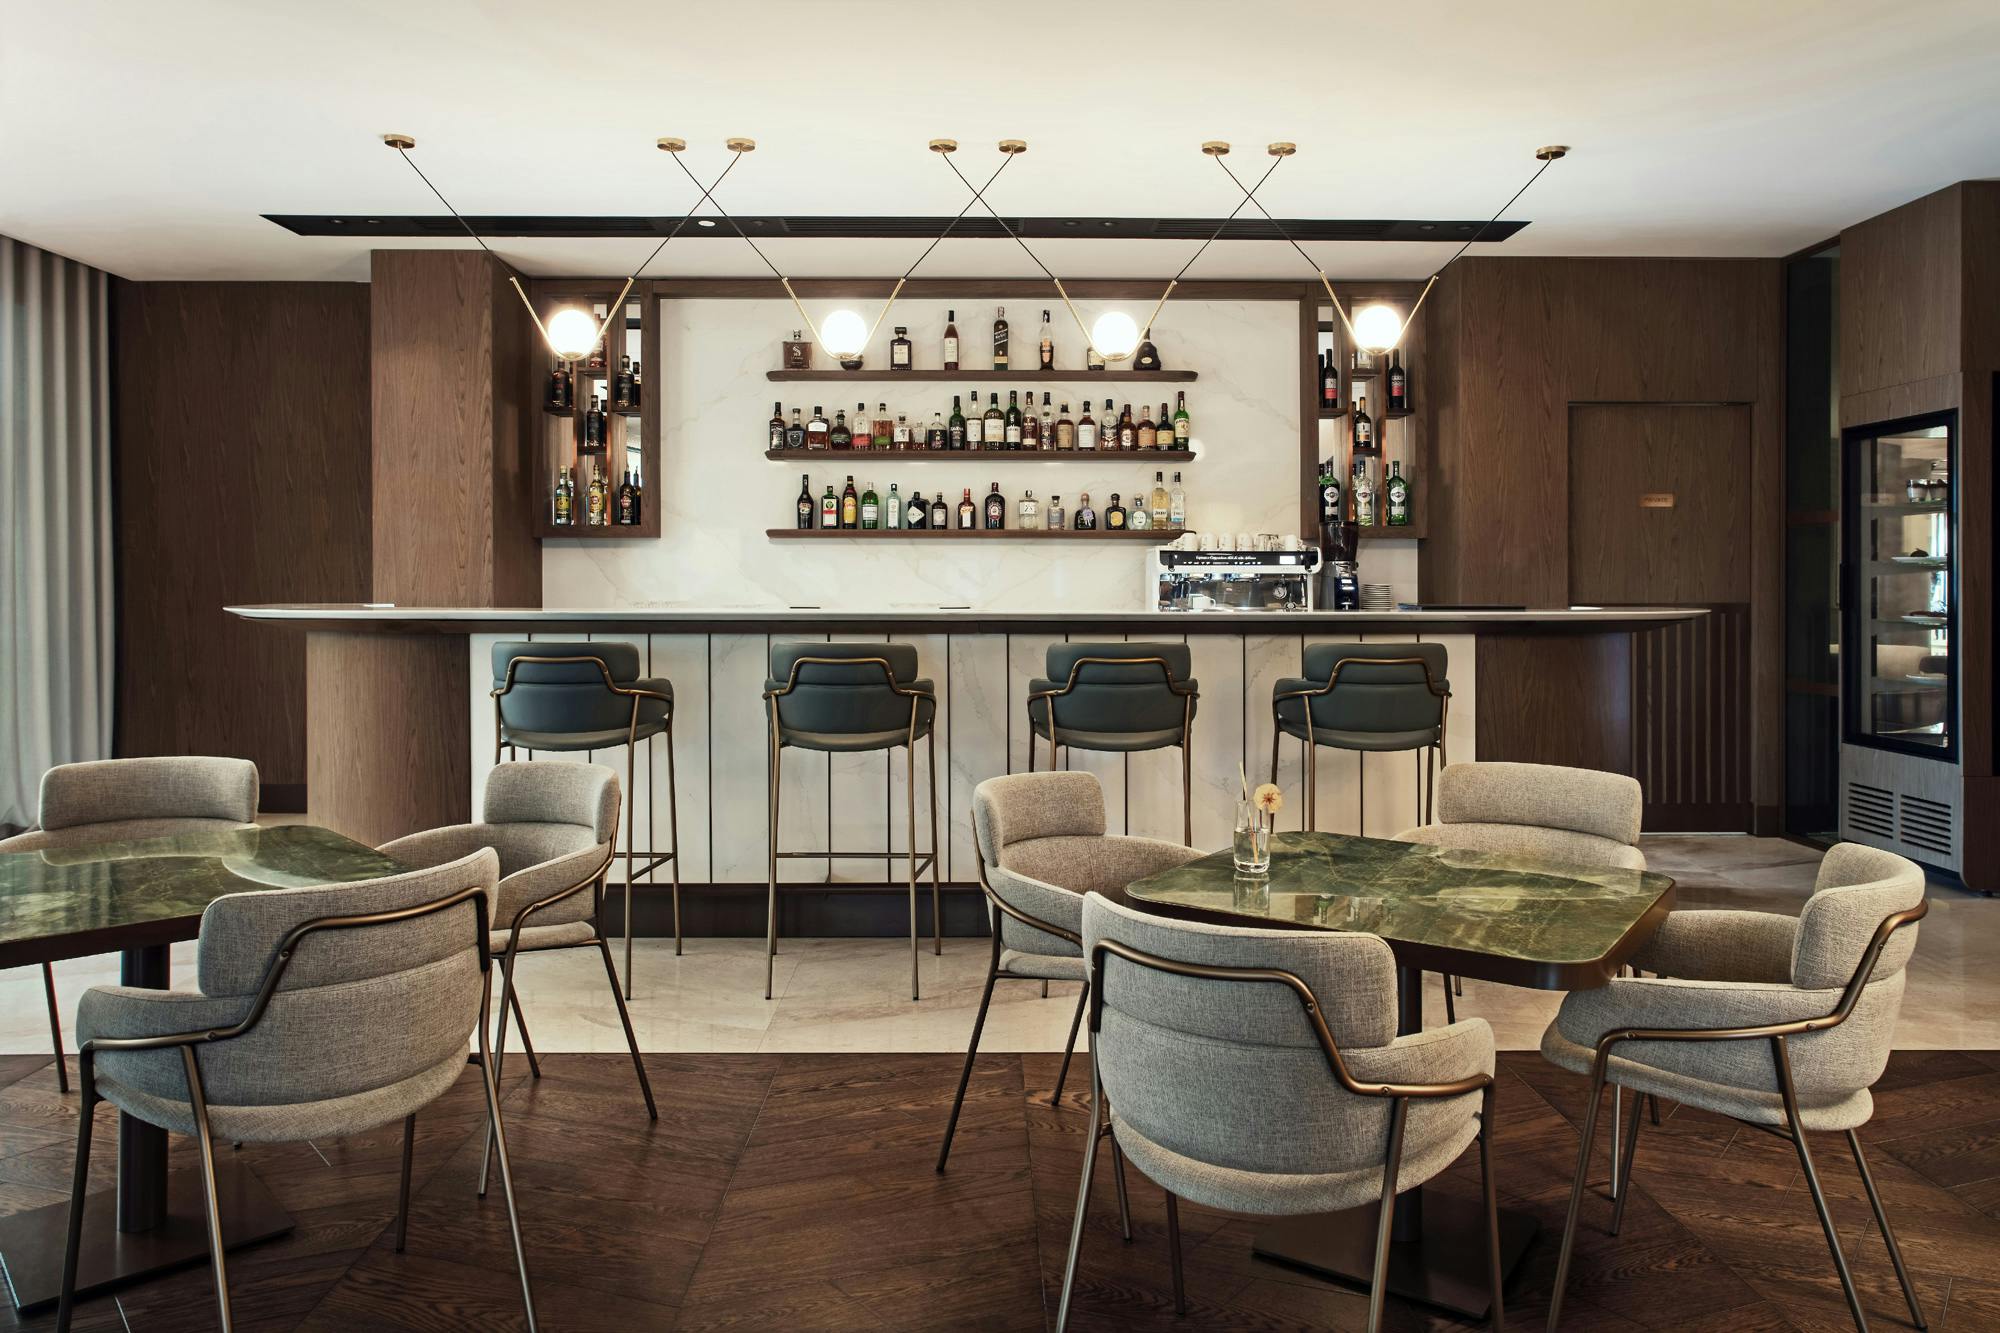 Numéro d'image 50 de la section actuelle de A century old building gets a new lease of life as one of Oslo’s most vibrant hotels thanks to Silestone de Cosentino France